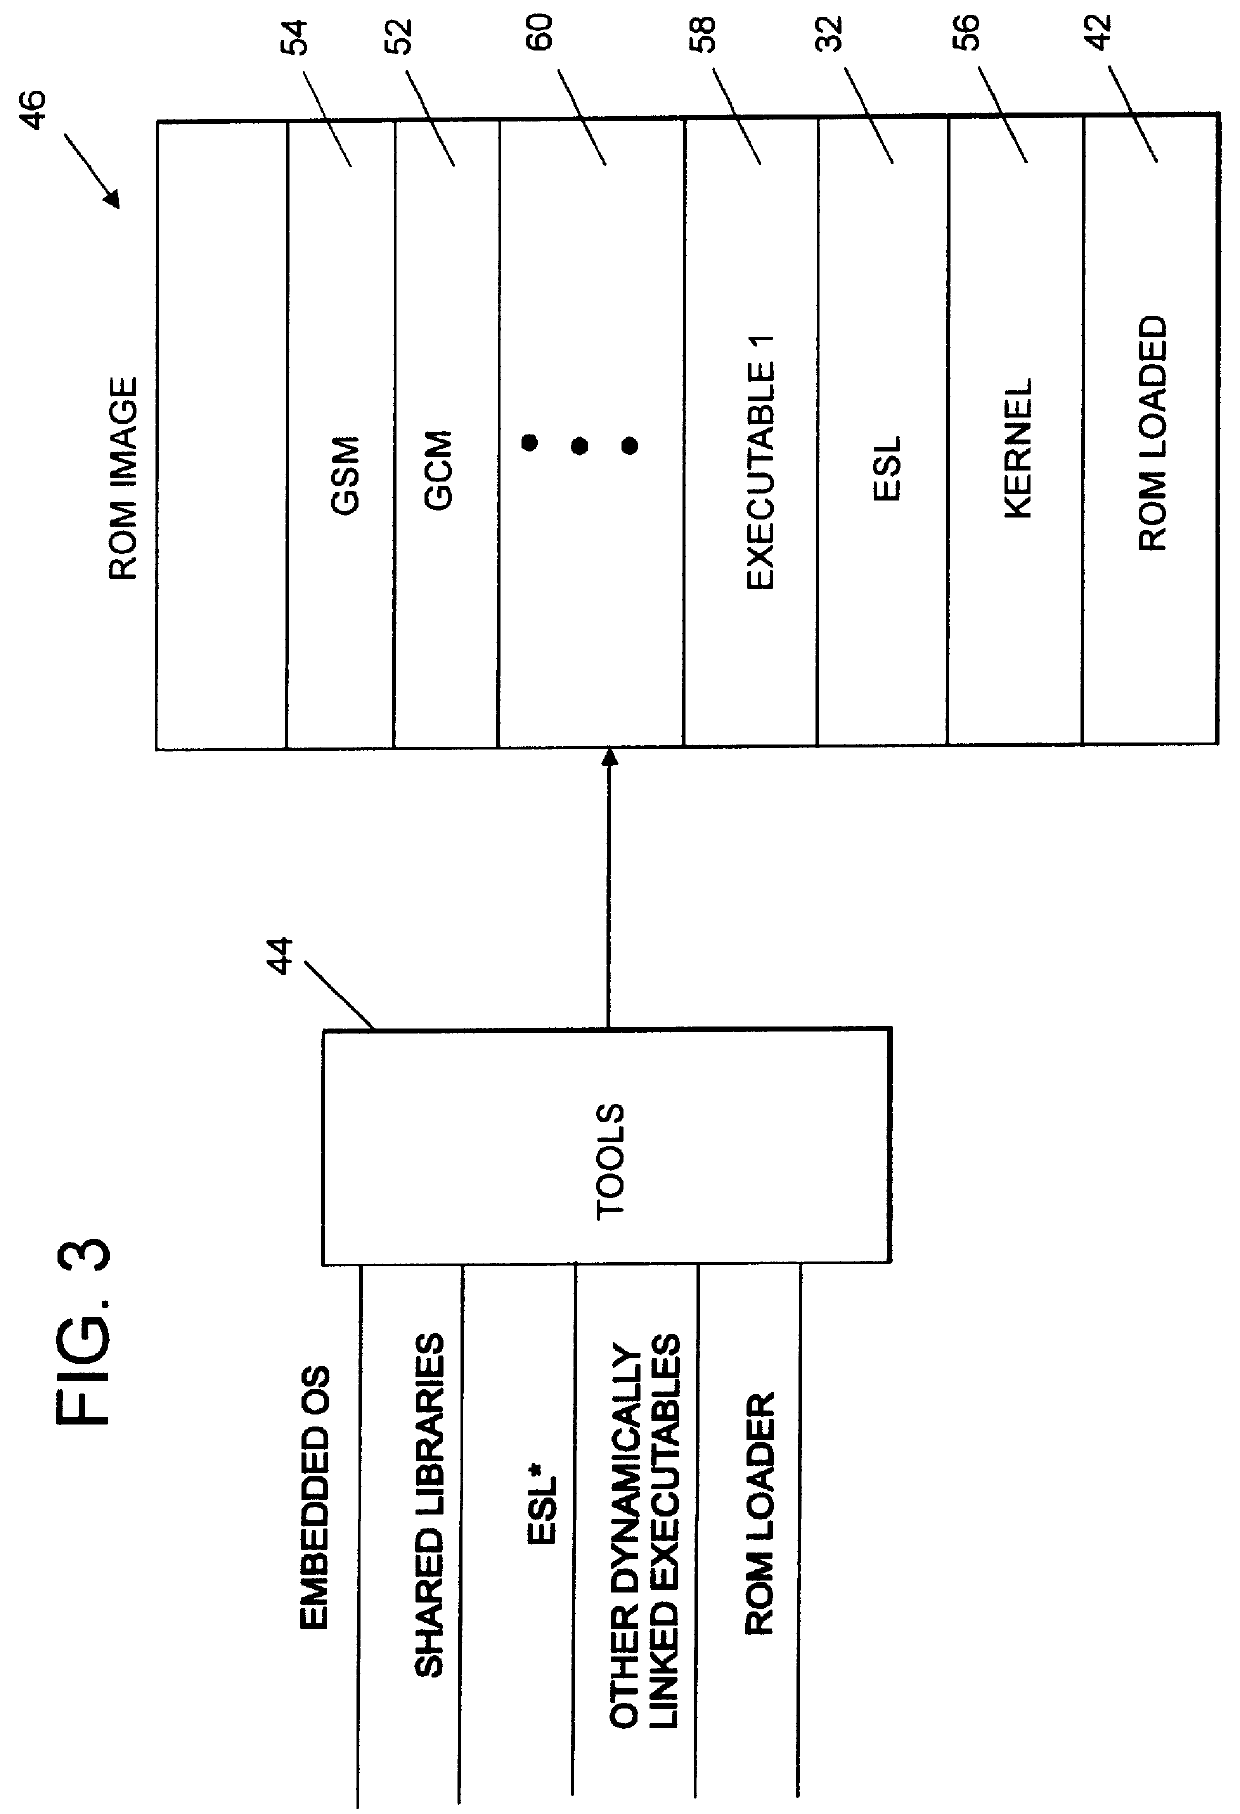 Embedded system having dynamically linked dynamic loader and method for linking dynamic loader shared libraries and application programs